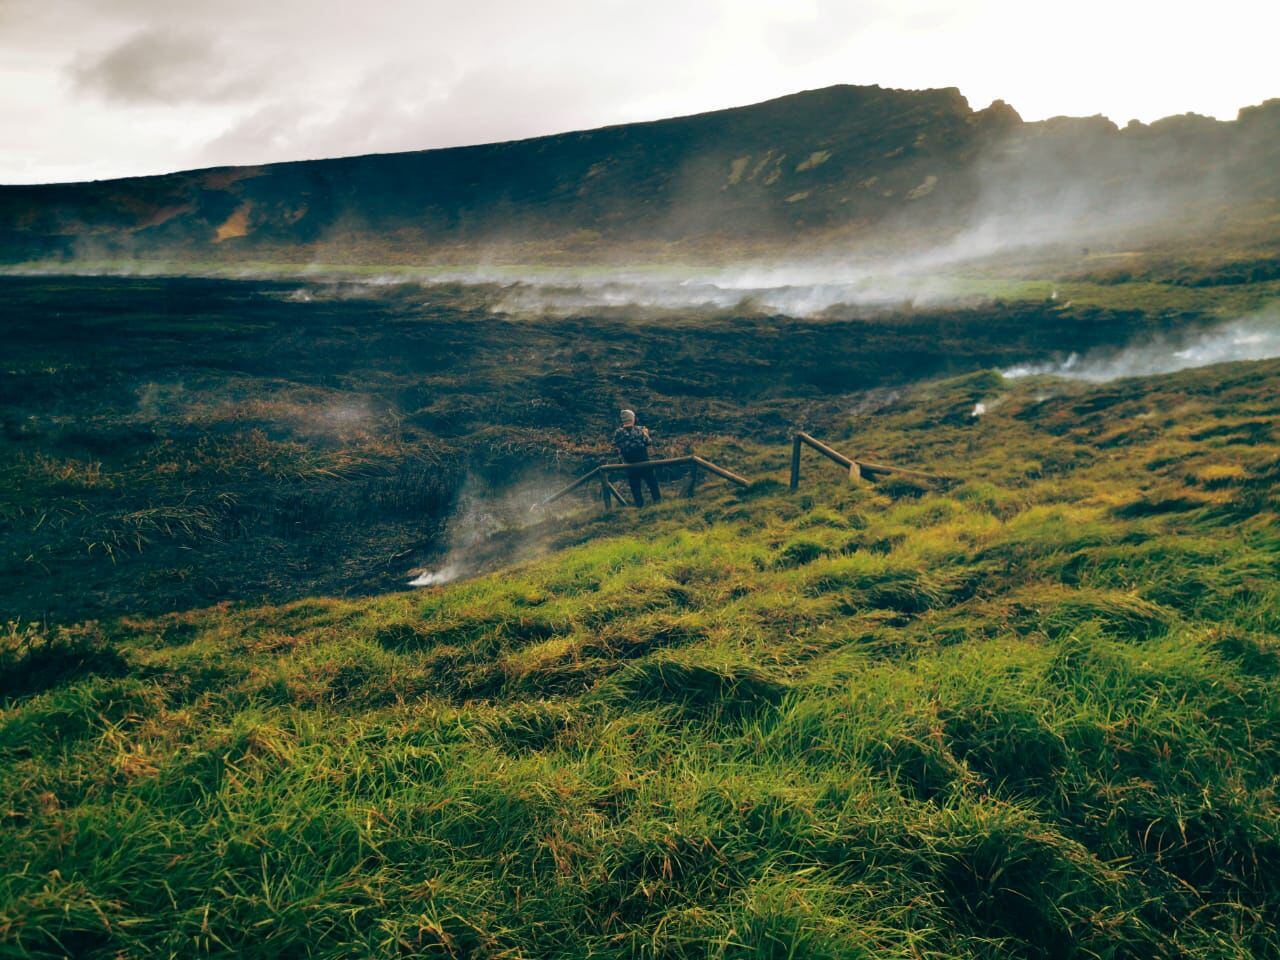 Photograph provided by the Municipality of Easter Island showing an area damaged by the fire.